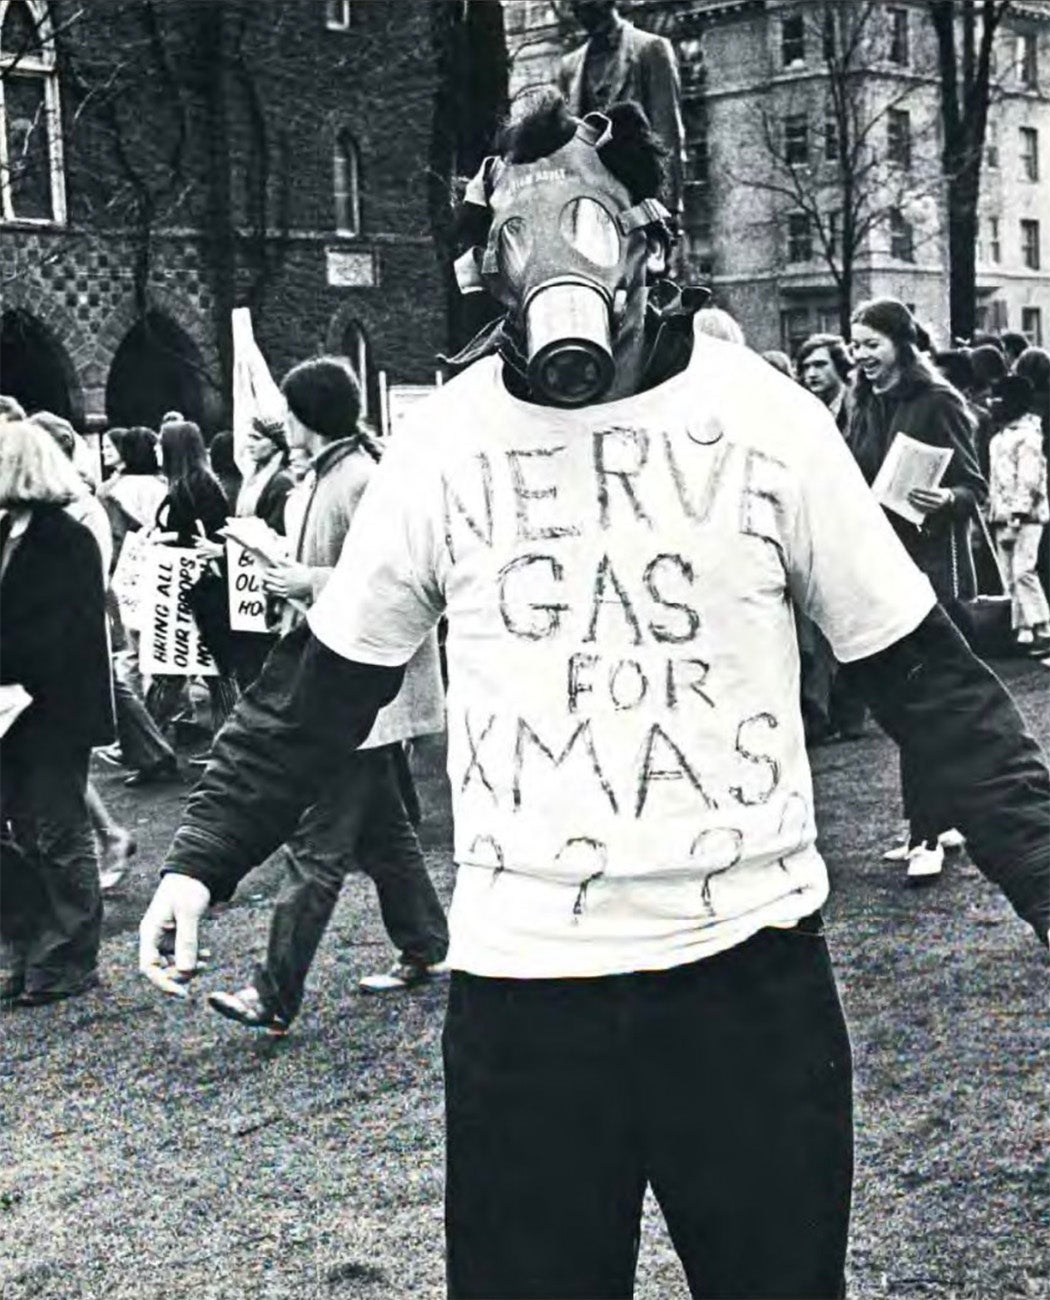 A black and white image of a man facing the camera, wearing a gas mask and a shirt that reads "Nerve gas for xmas????"